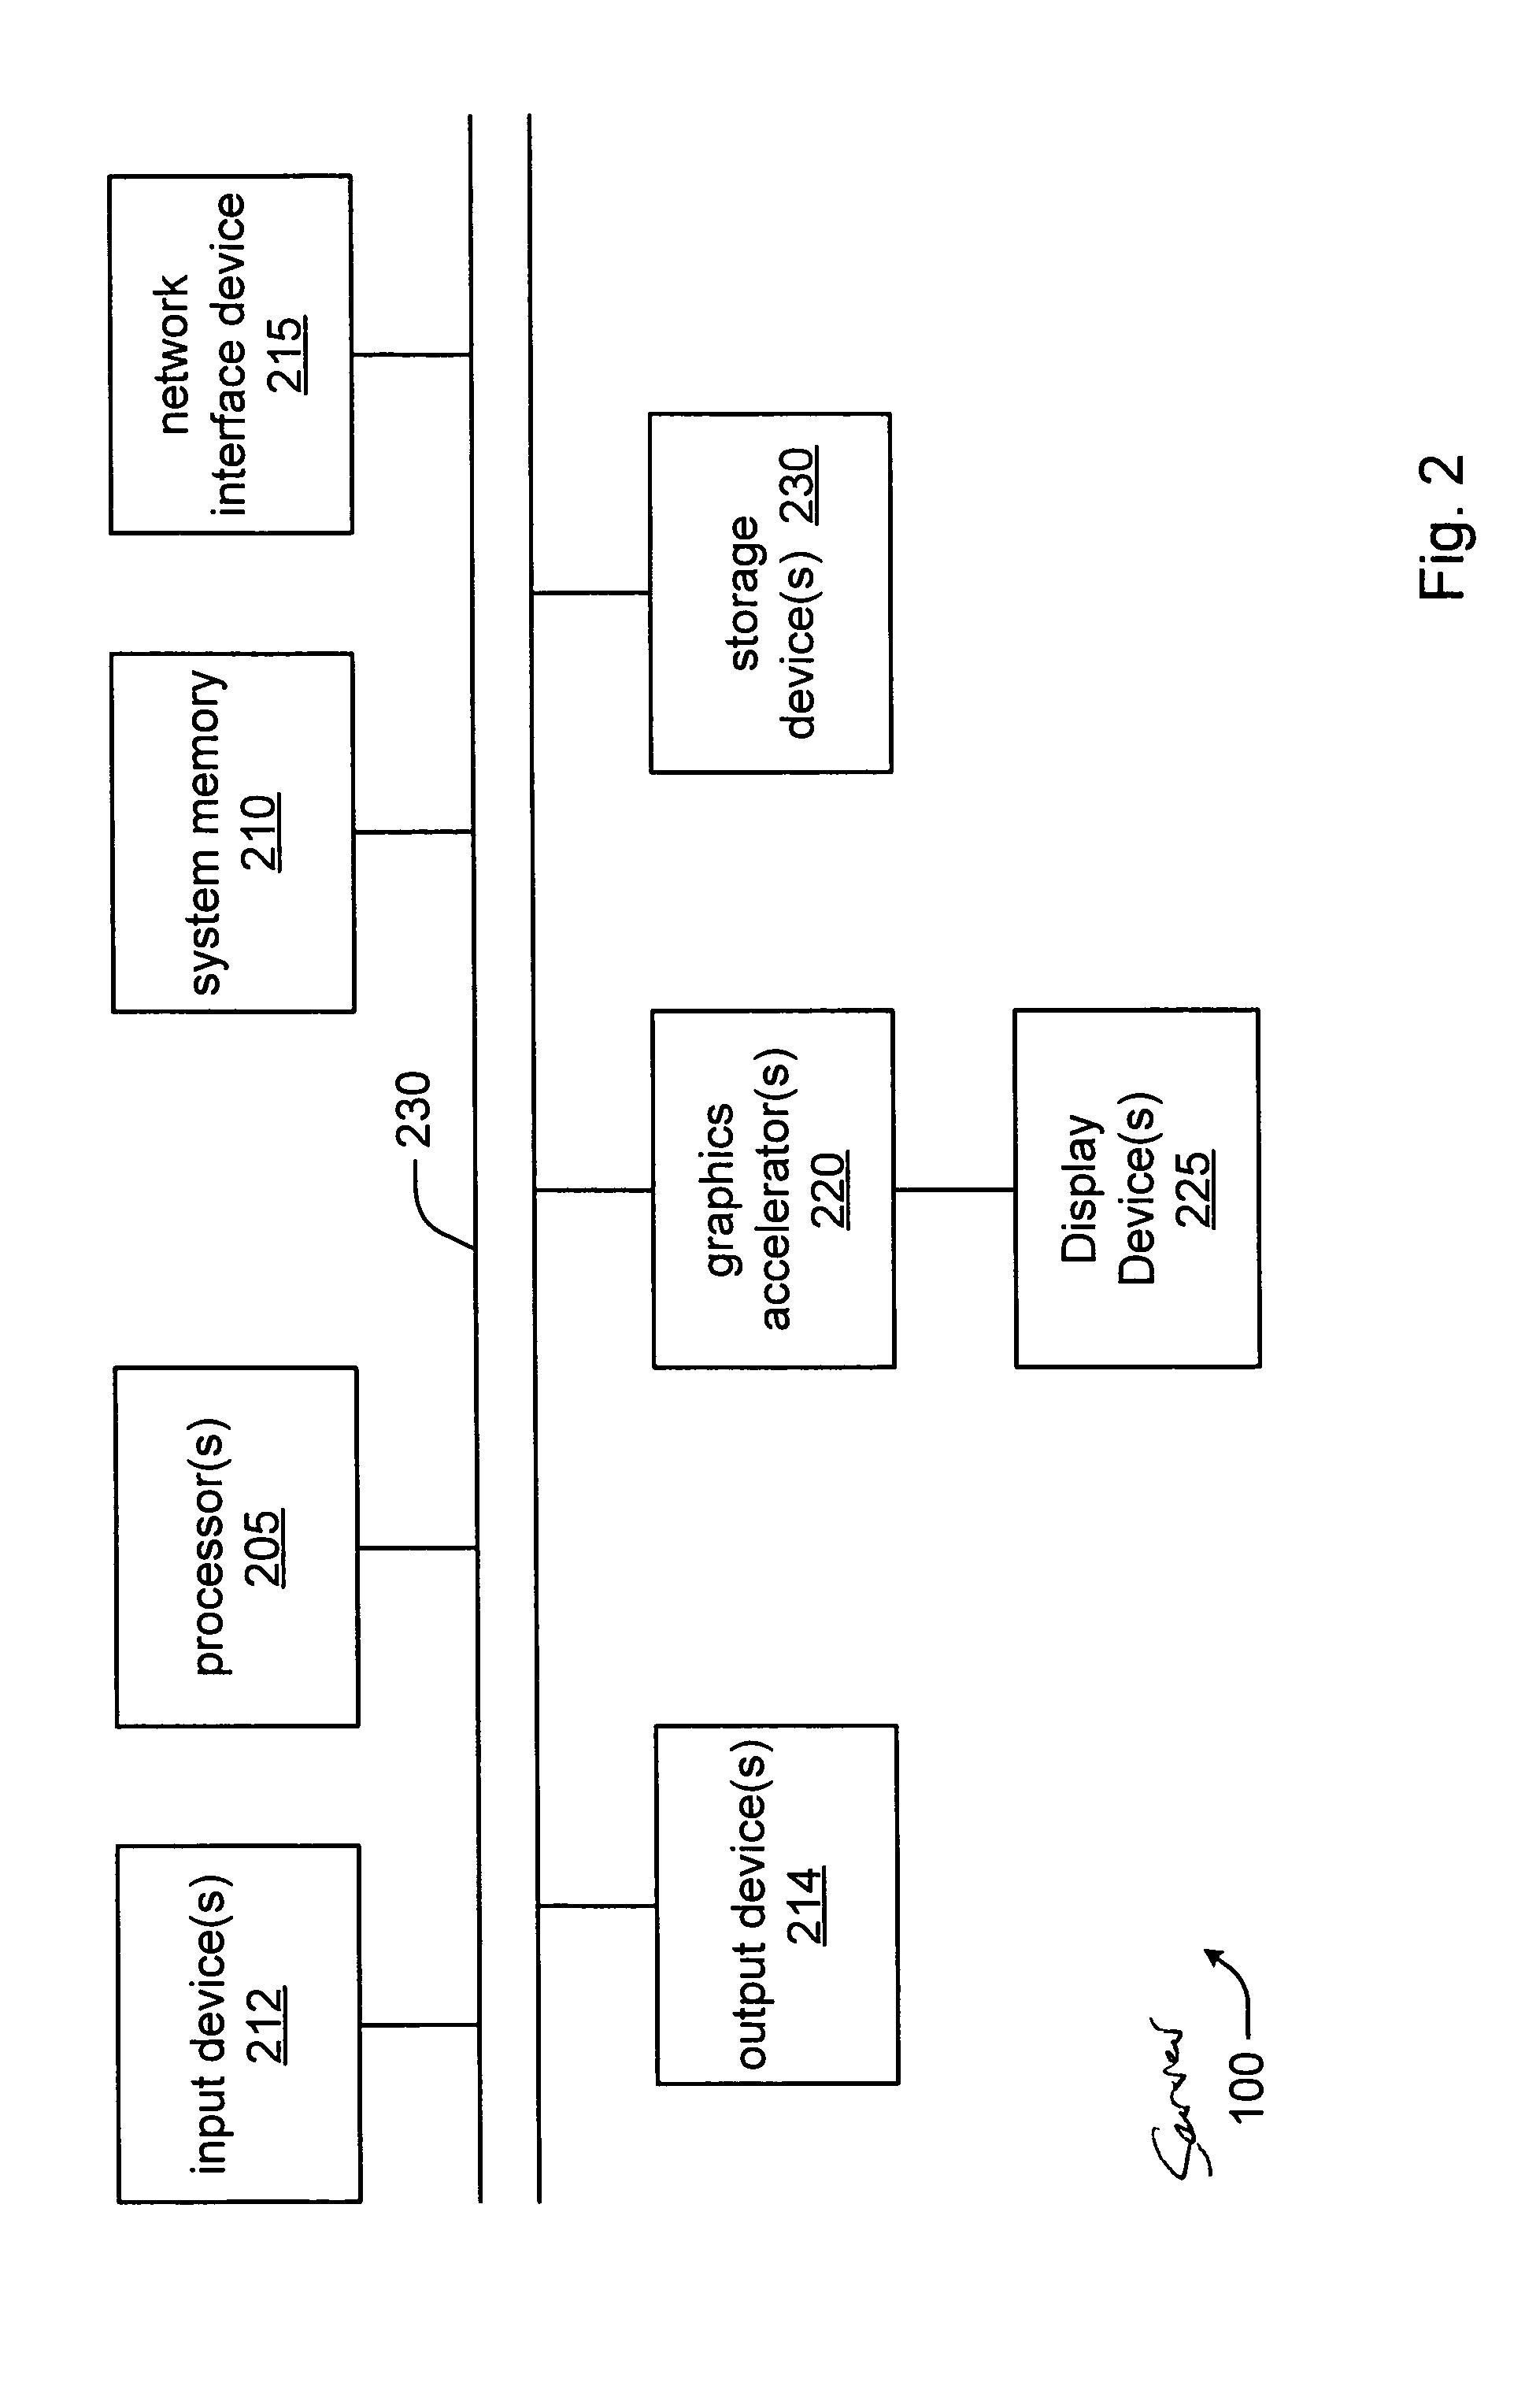 Software system for efficient data transport across a distributed system for interactive viewing